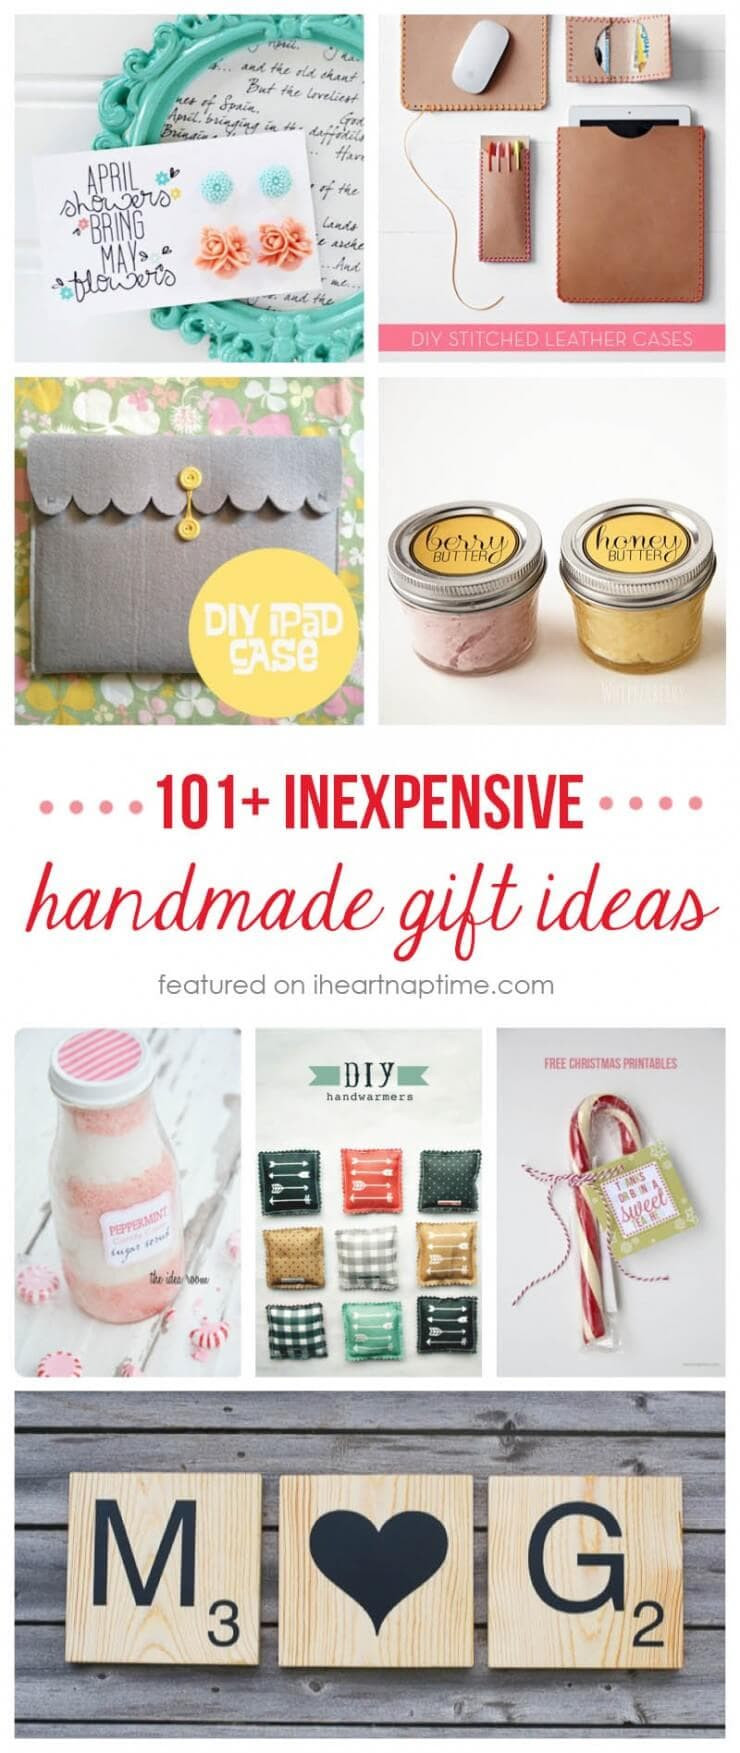 Christmas Gifts Ideas DIY
 50 homemade t ideas to make for under $5 I Heart Nap Time